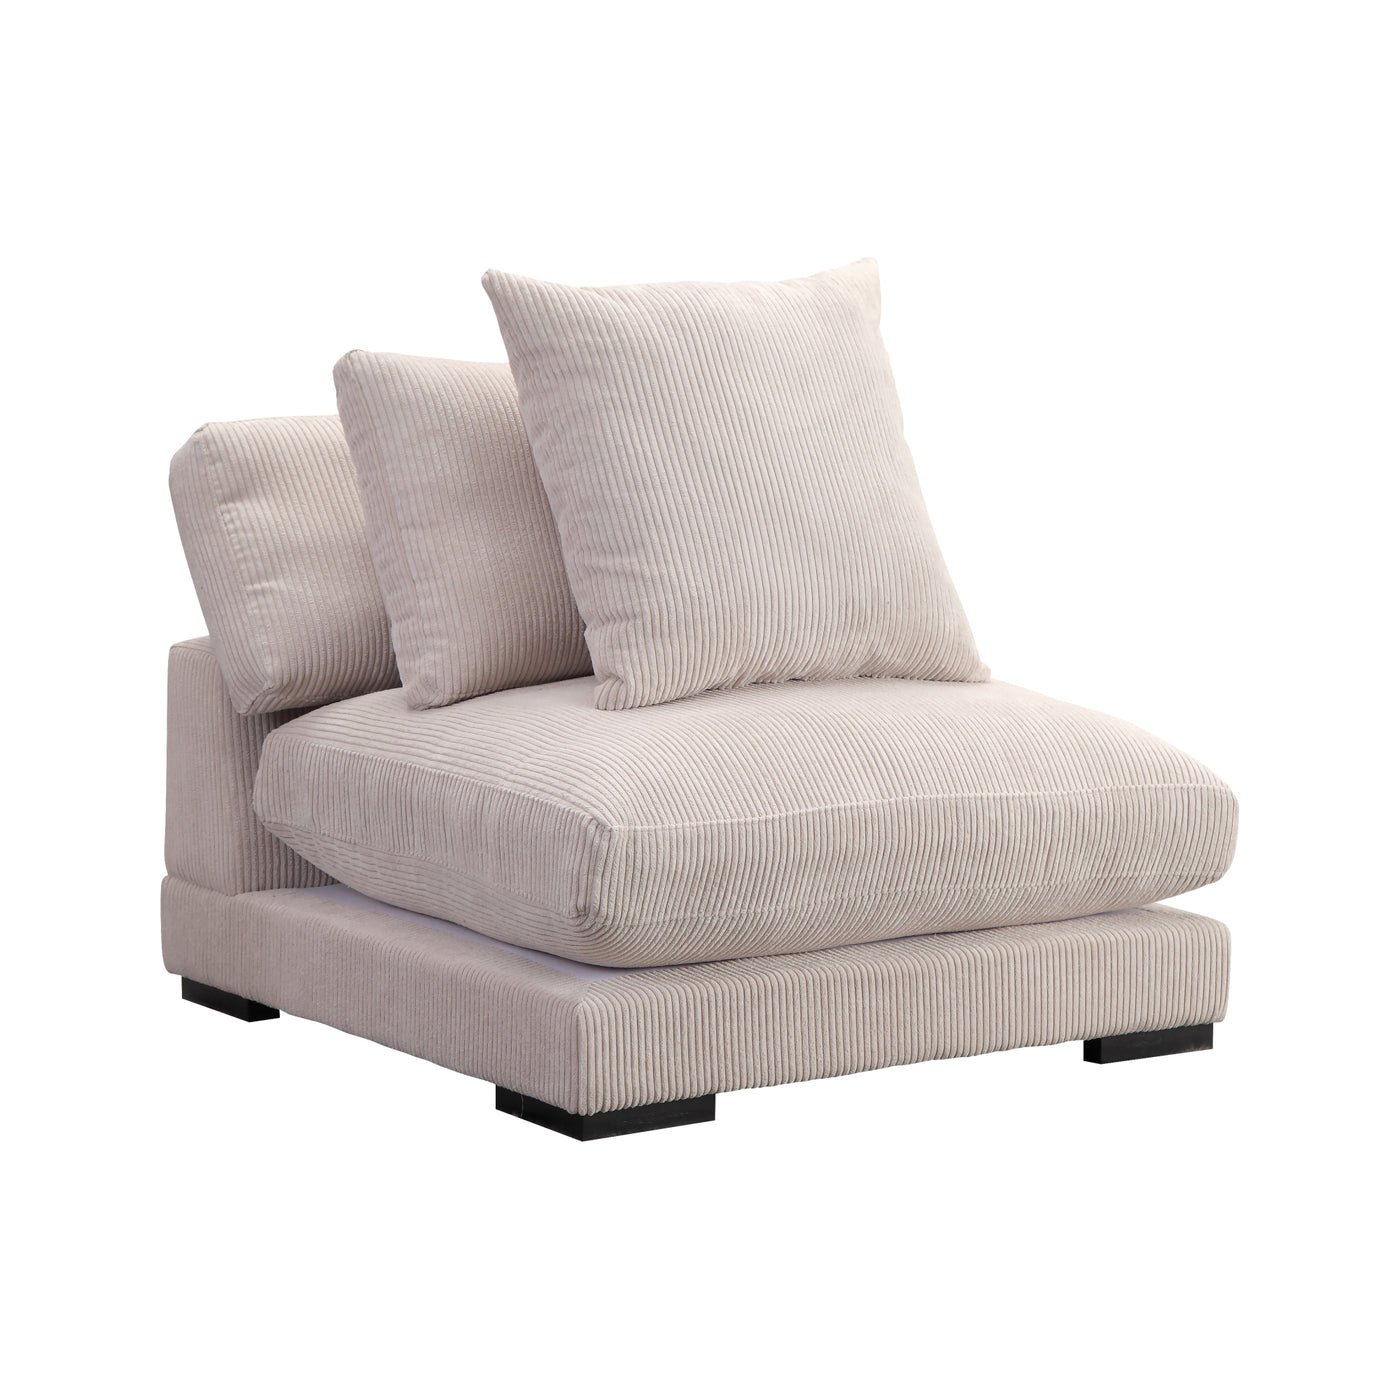 Seriously comfortable, seriously stylish. Either at home or in your commercial space, you can get cozier &amp; cushier usi...